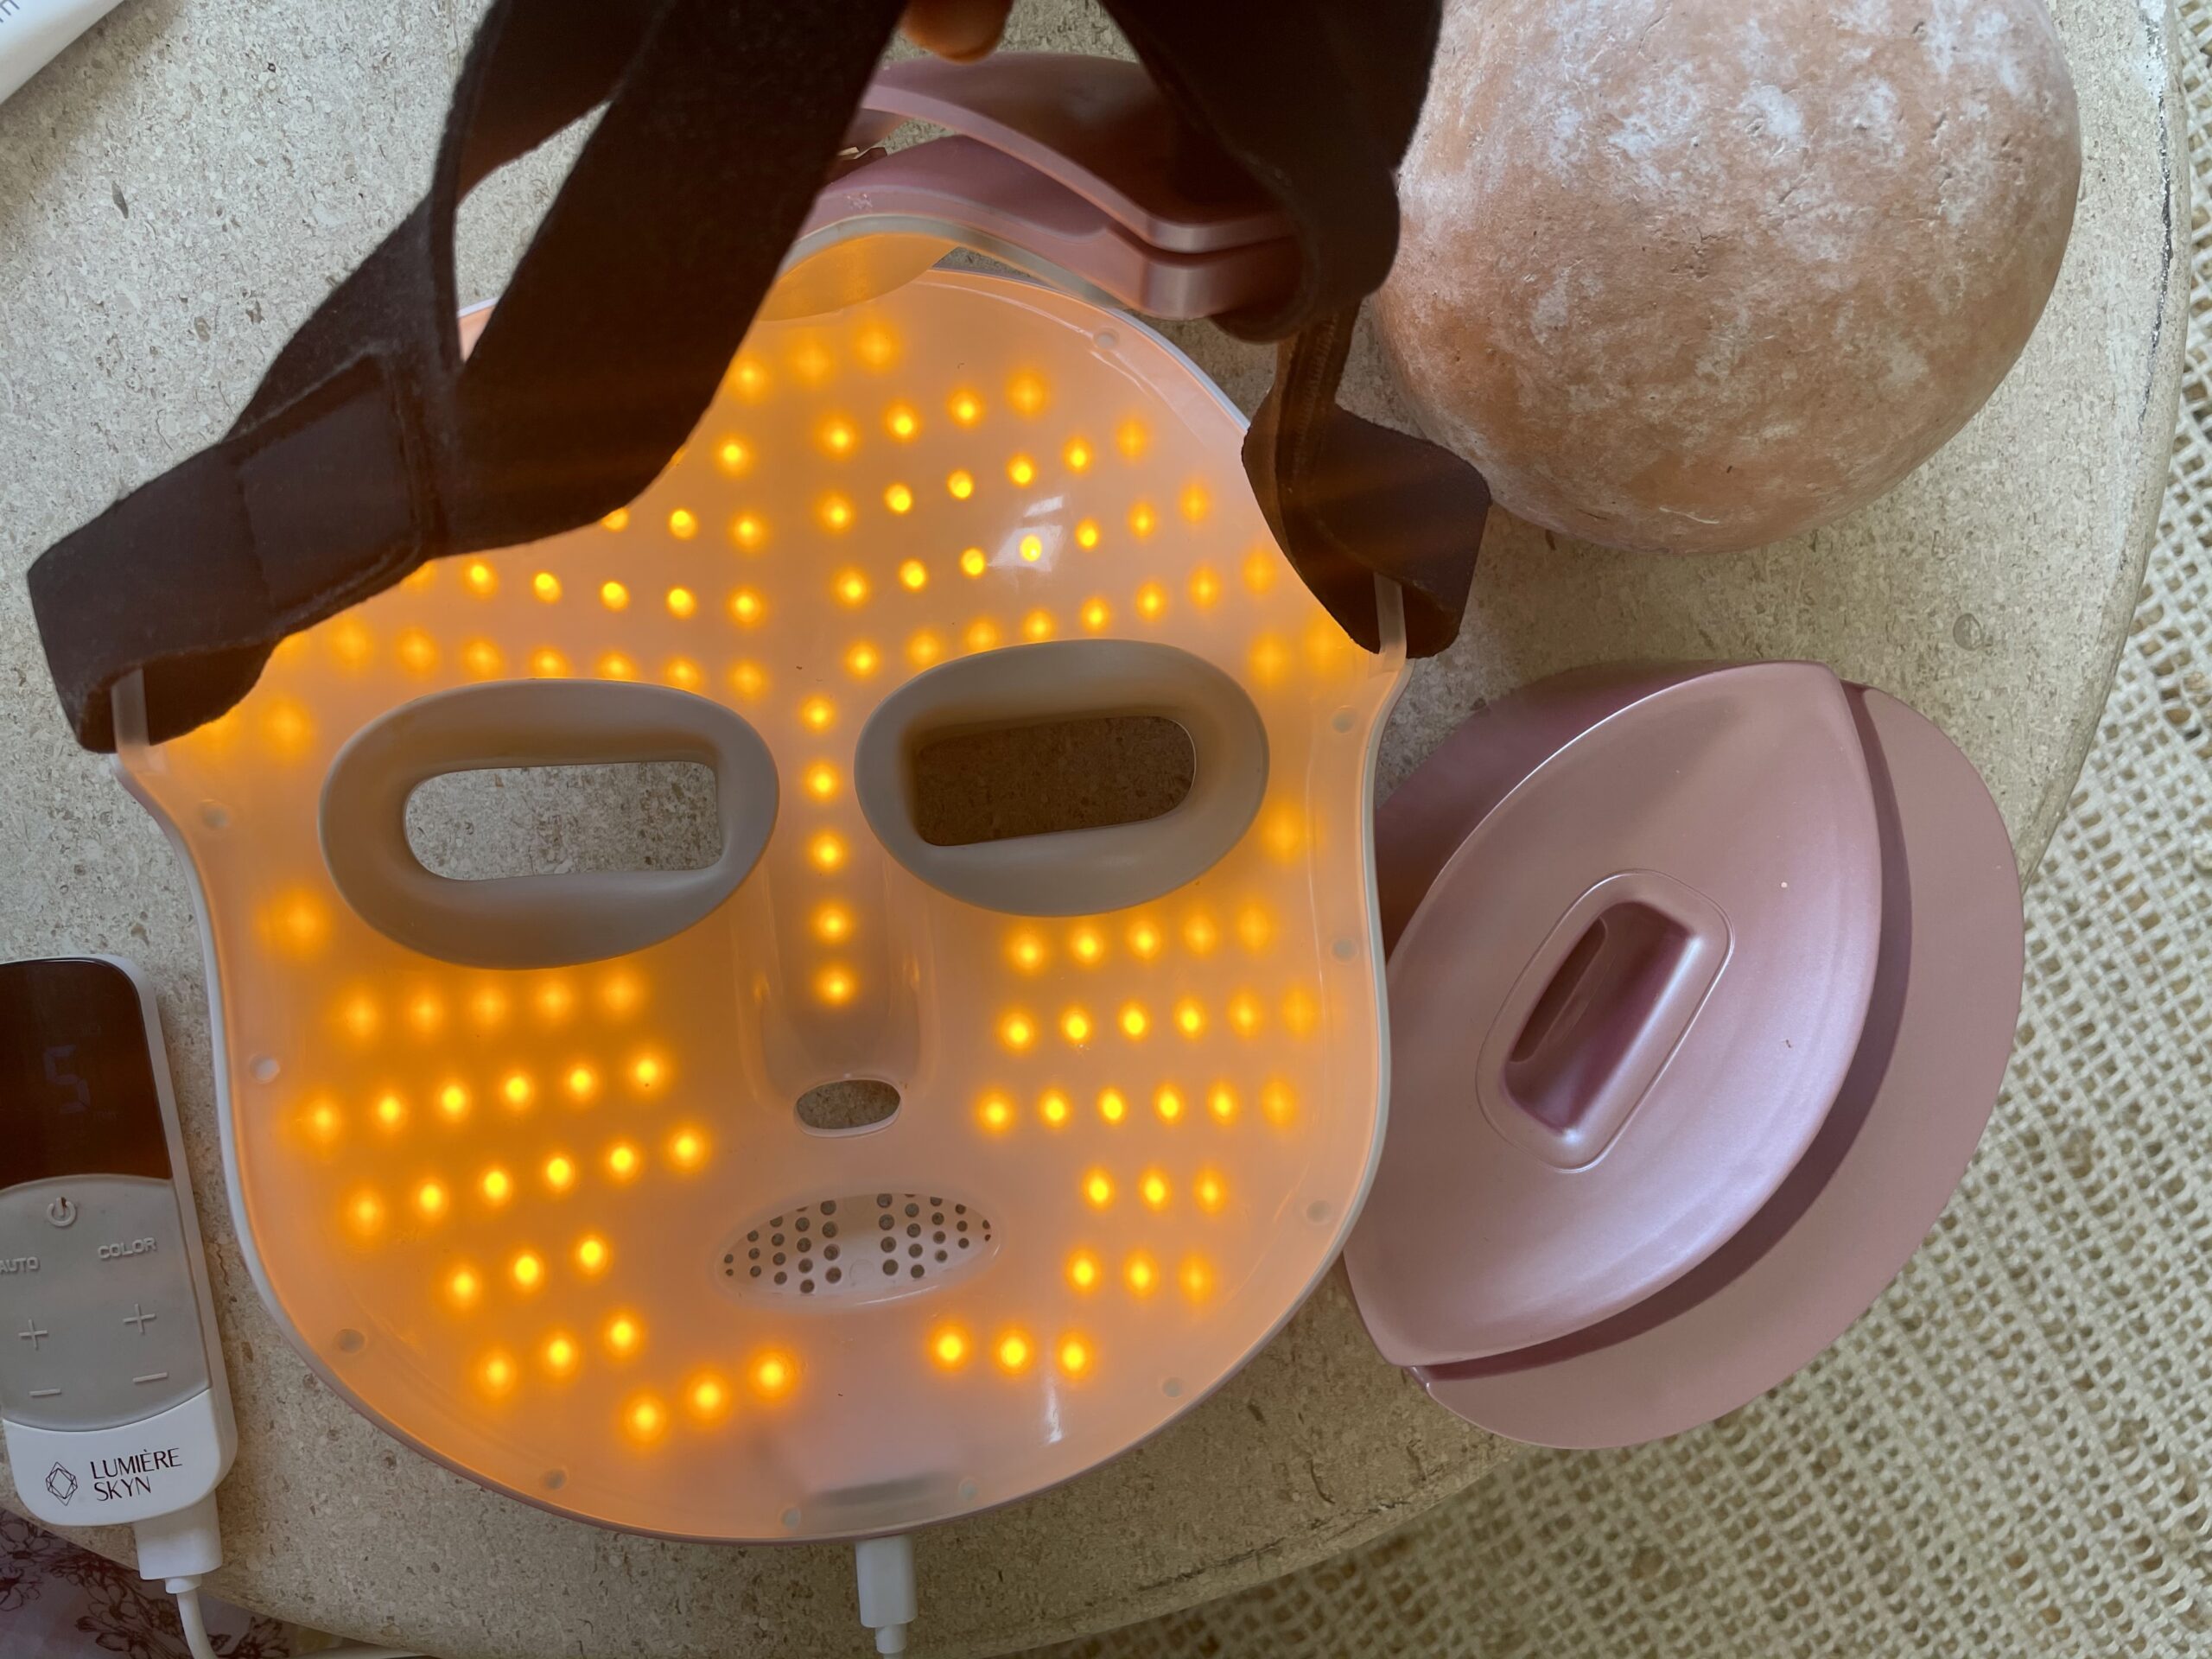 HyperGlo LED Mask Review